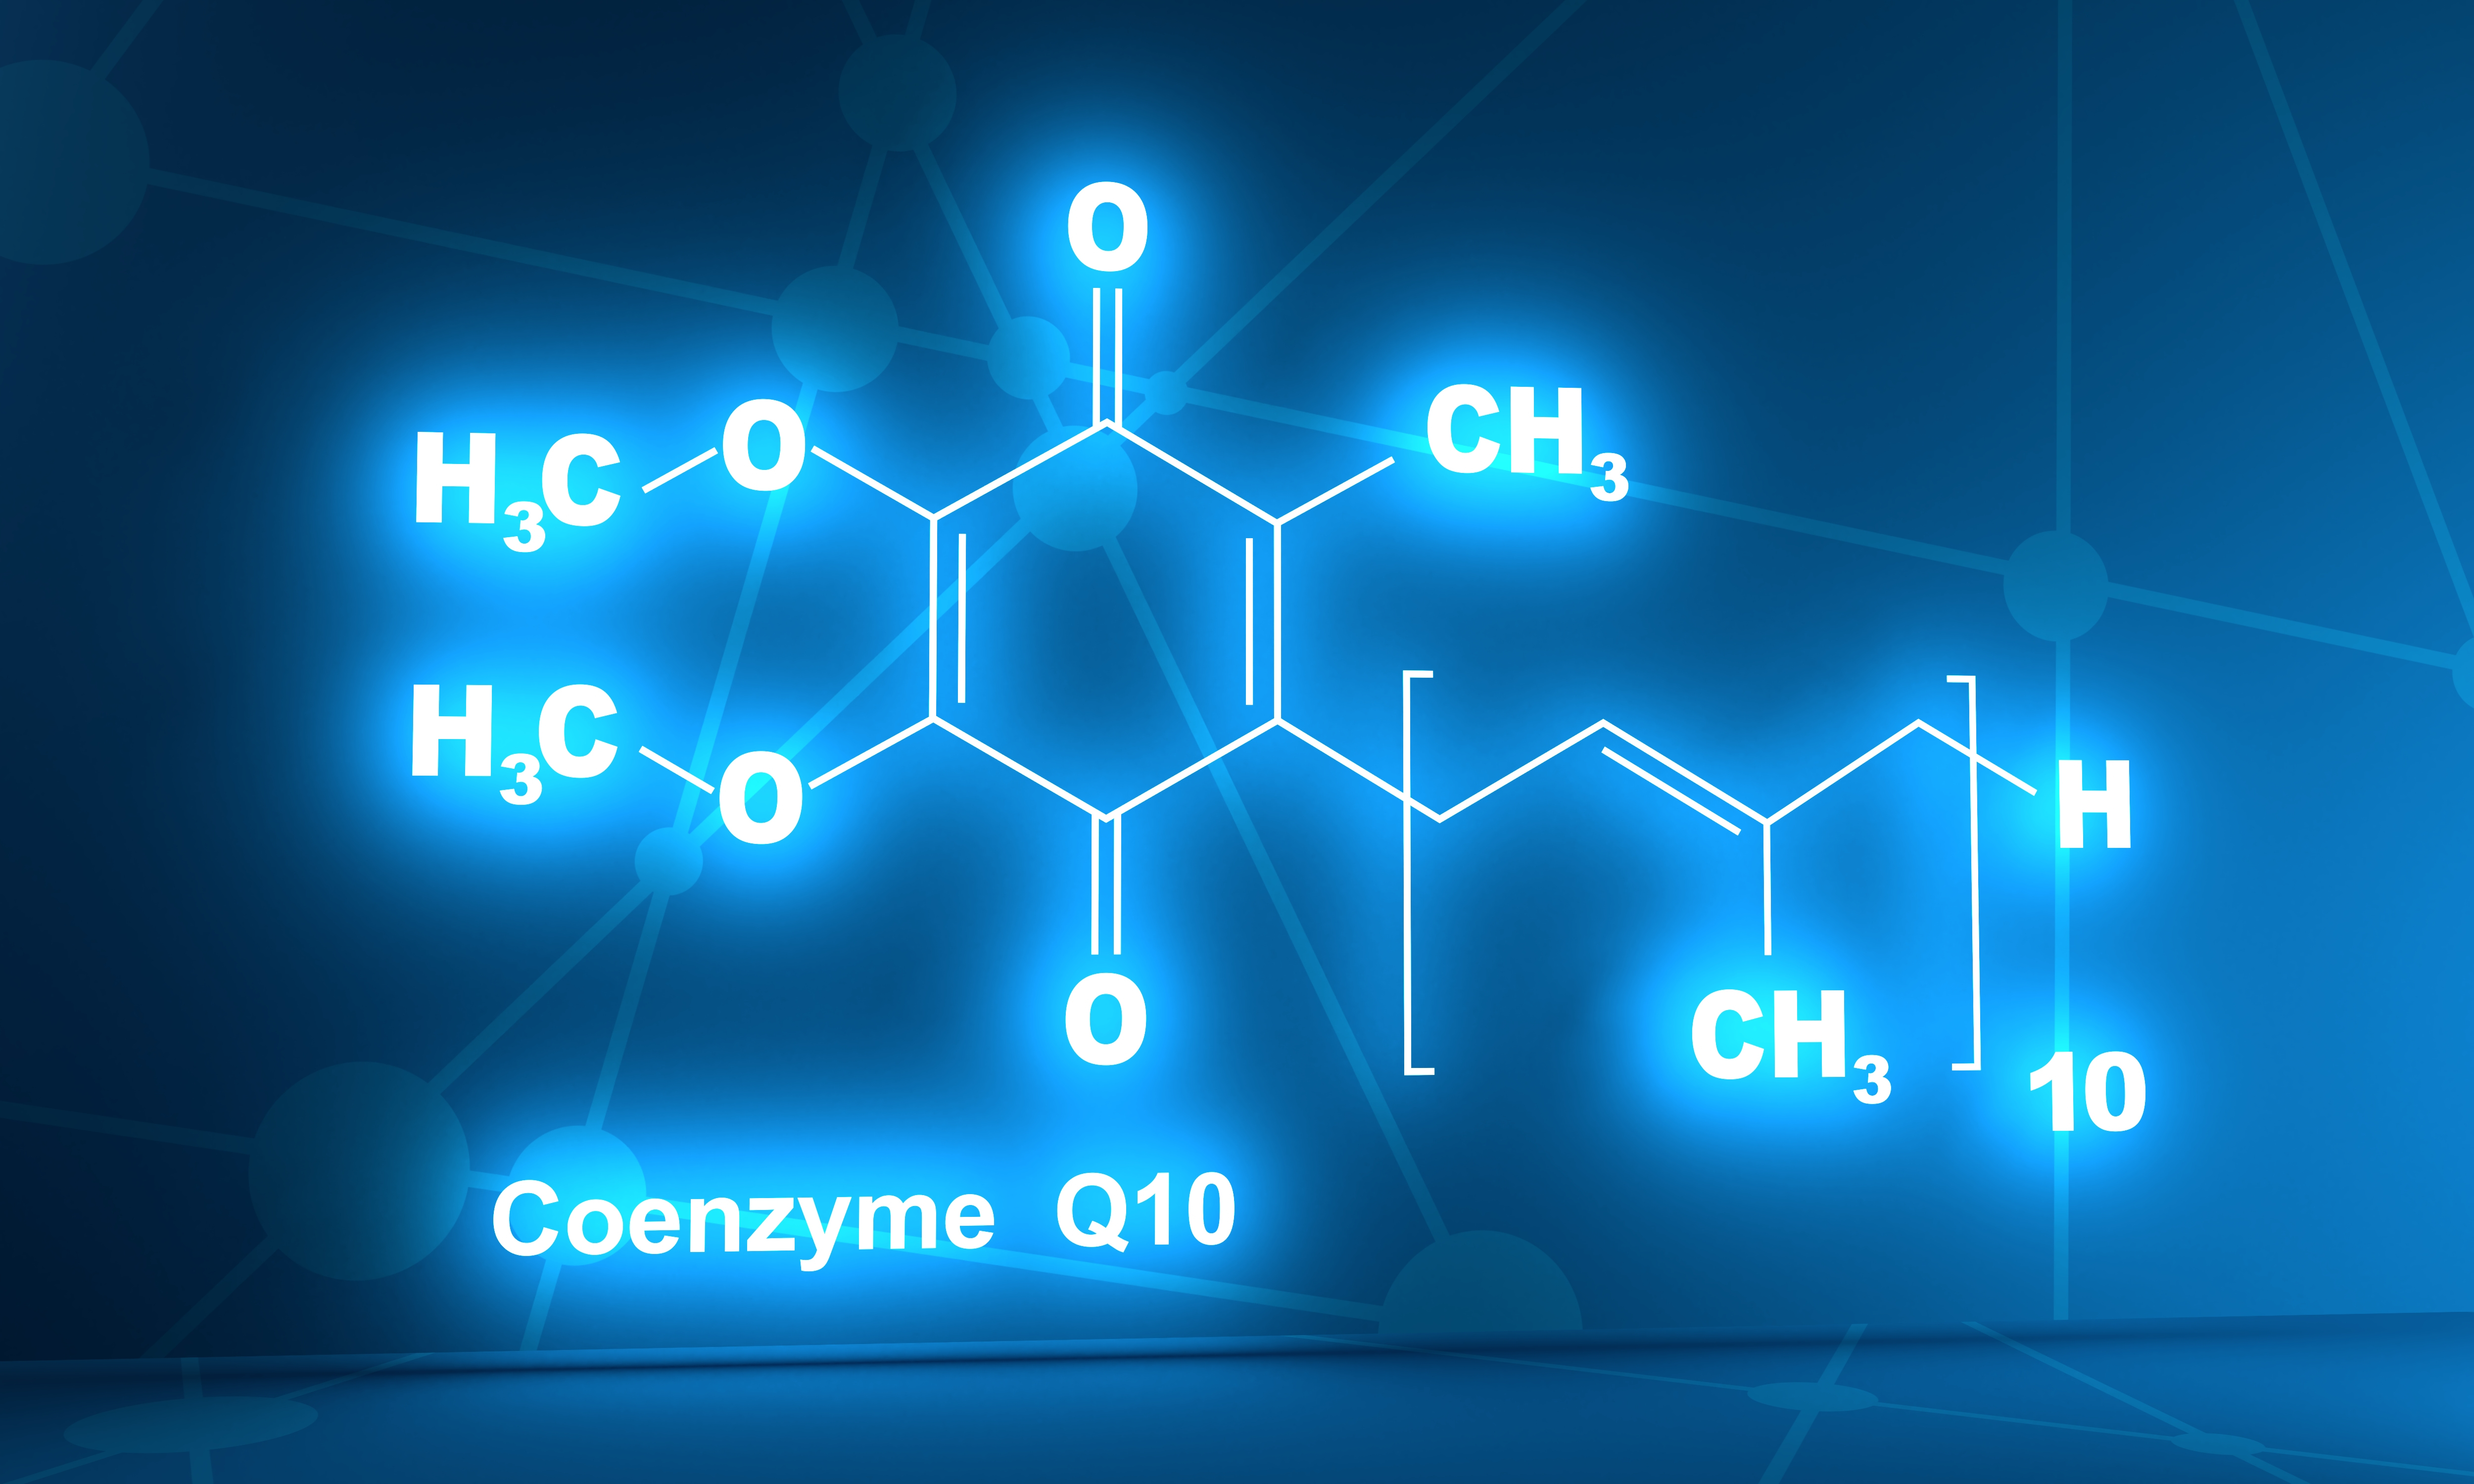 Coenzyme Q10, or CoQ10, cancer and chronic illnesses